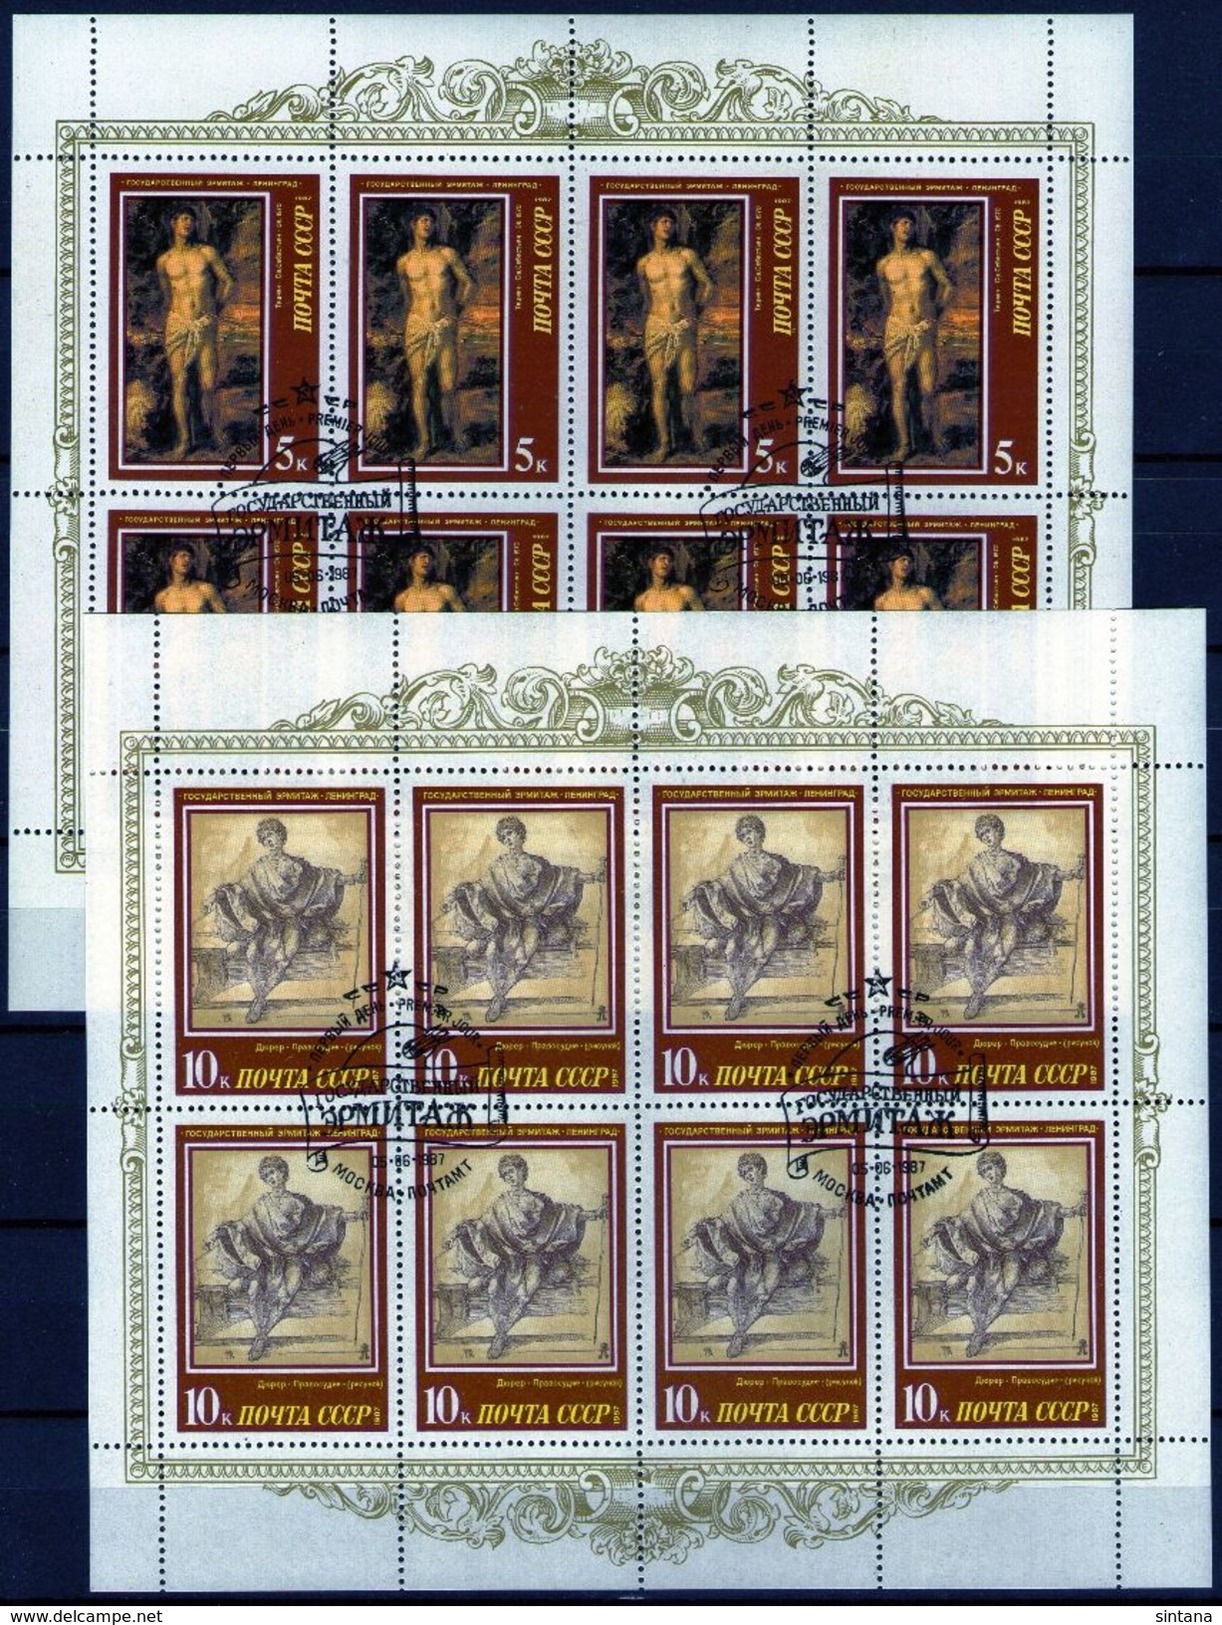 Sowjetunion/Russia 1987 Mi.5718-19 Eremitage Museen 2 KB/Sc.5561-62a Hermitage Paintings 2 M/S Gestempelt/used - Blocs & Feuillets